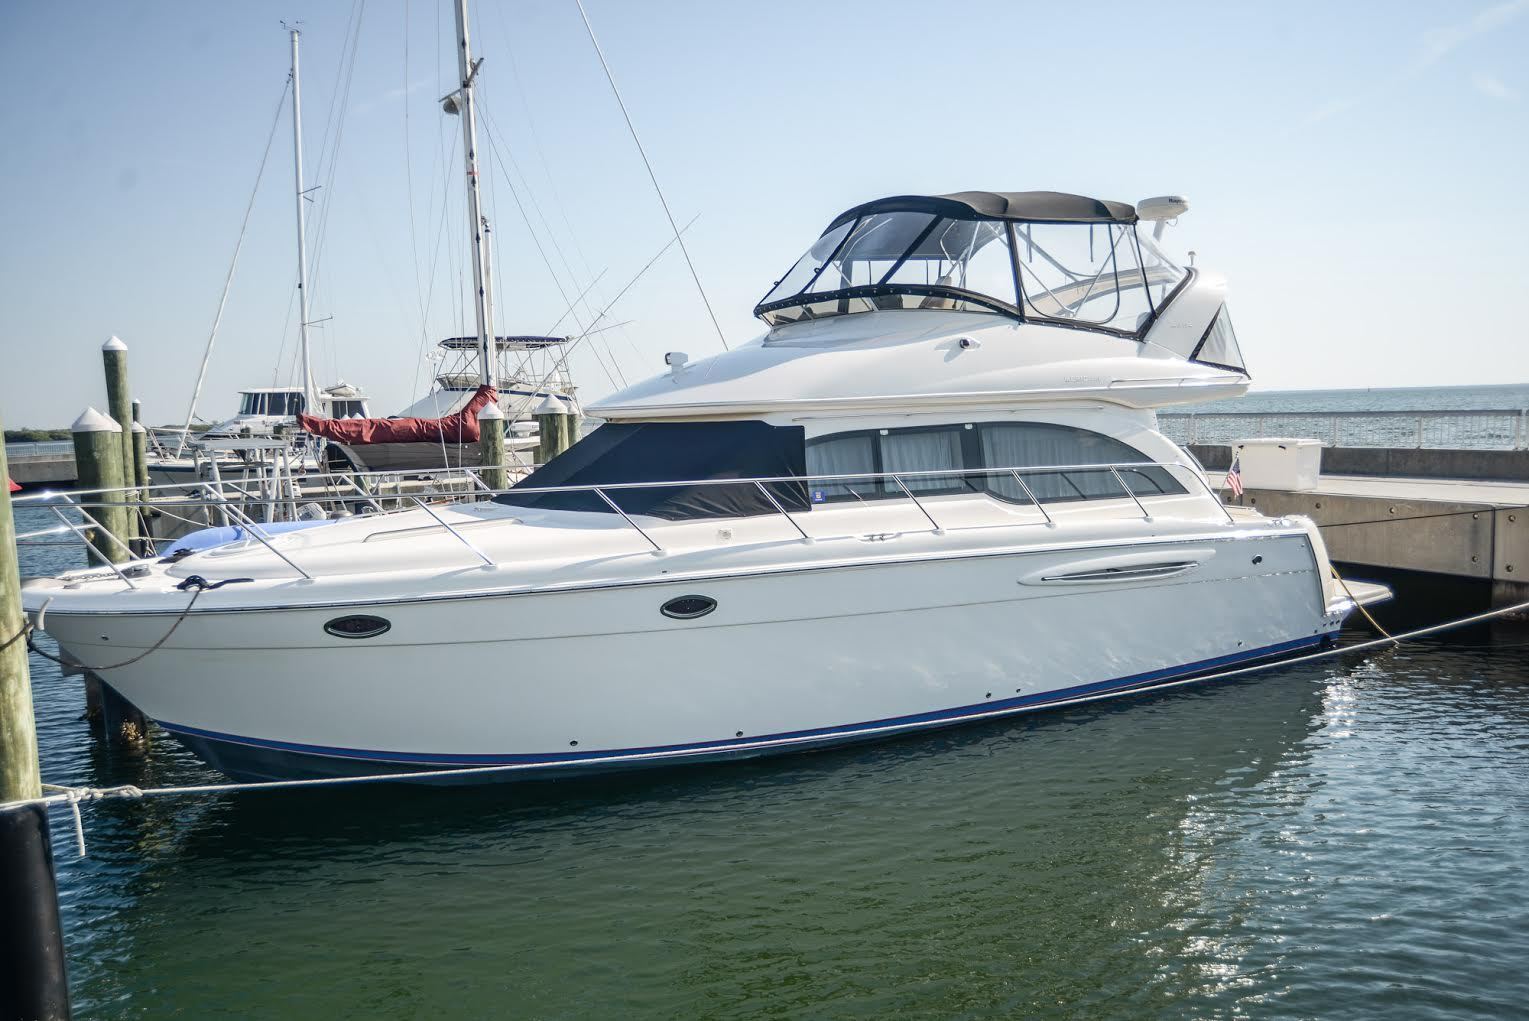 Meridian 411 2004 for sale for $31,100 - Boats-from-USA.com